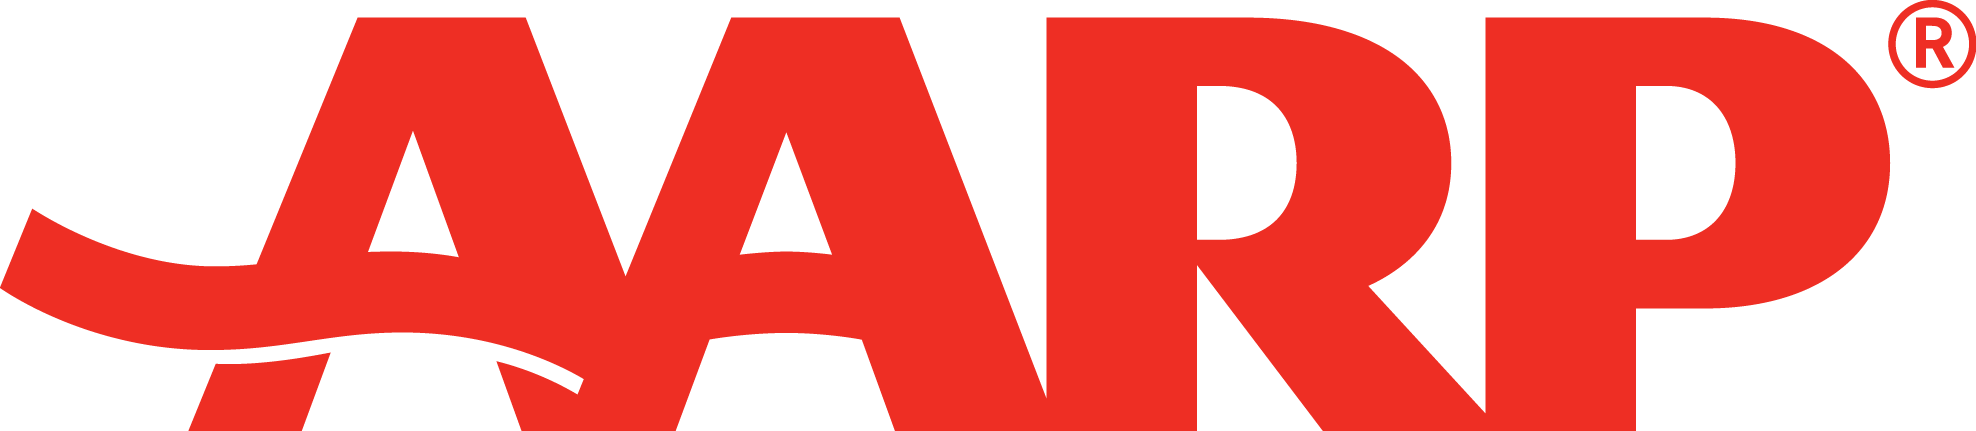 Aarp Red.png - Aarp, Transparent background PNG HD thumbnail